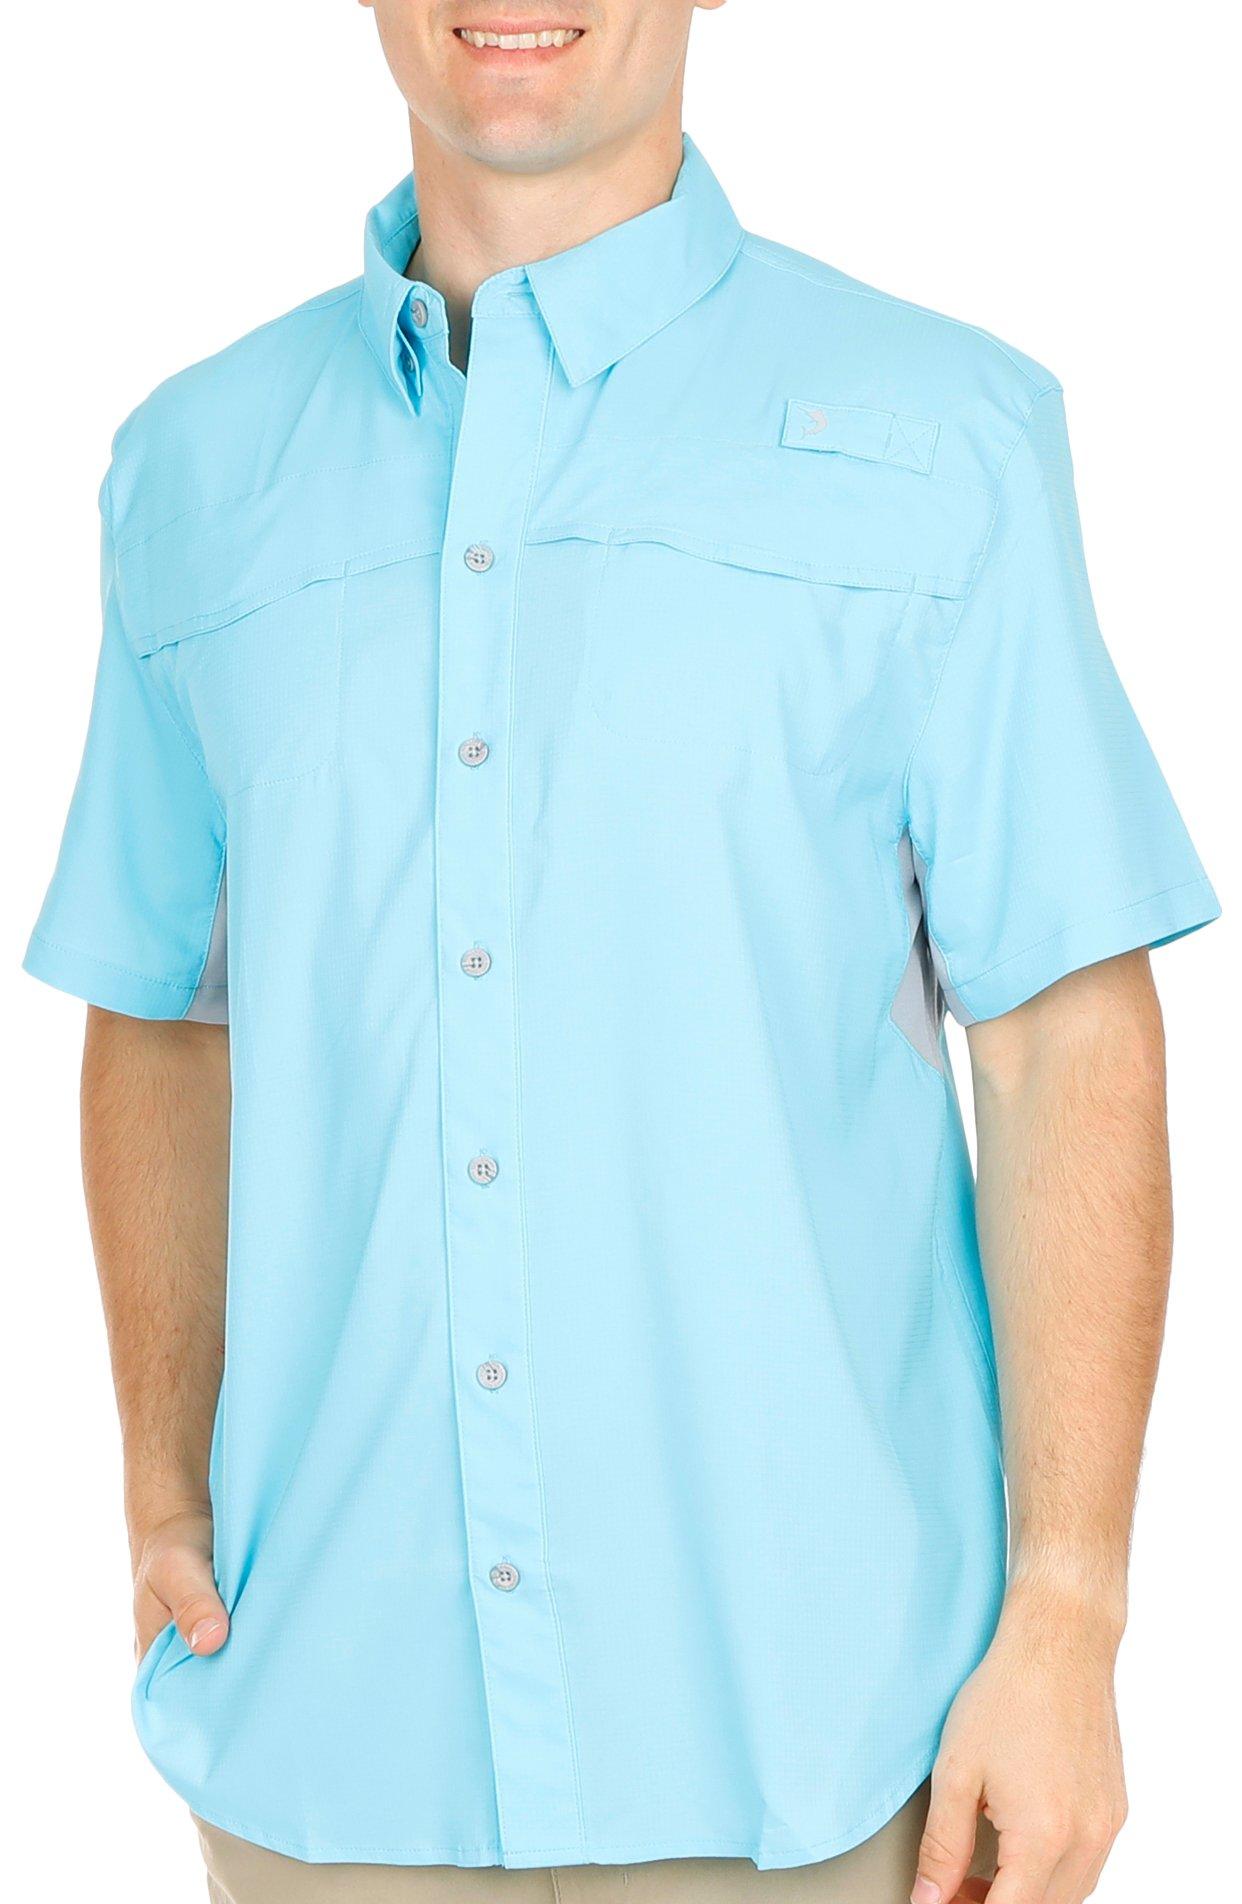 Reel Legends Mens Solid Mariner II Short Sleeve Shirt - Turquoise - Small